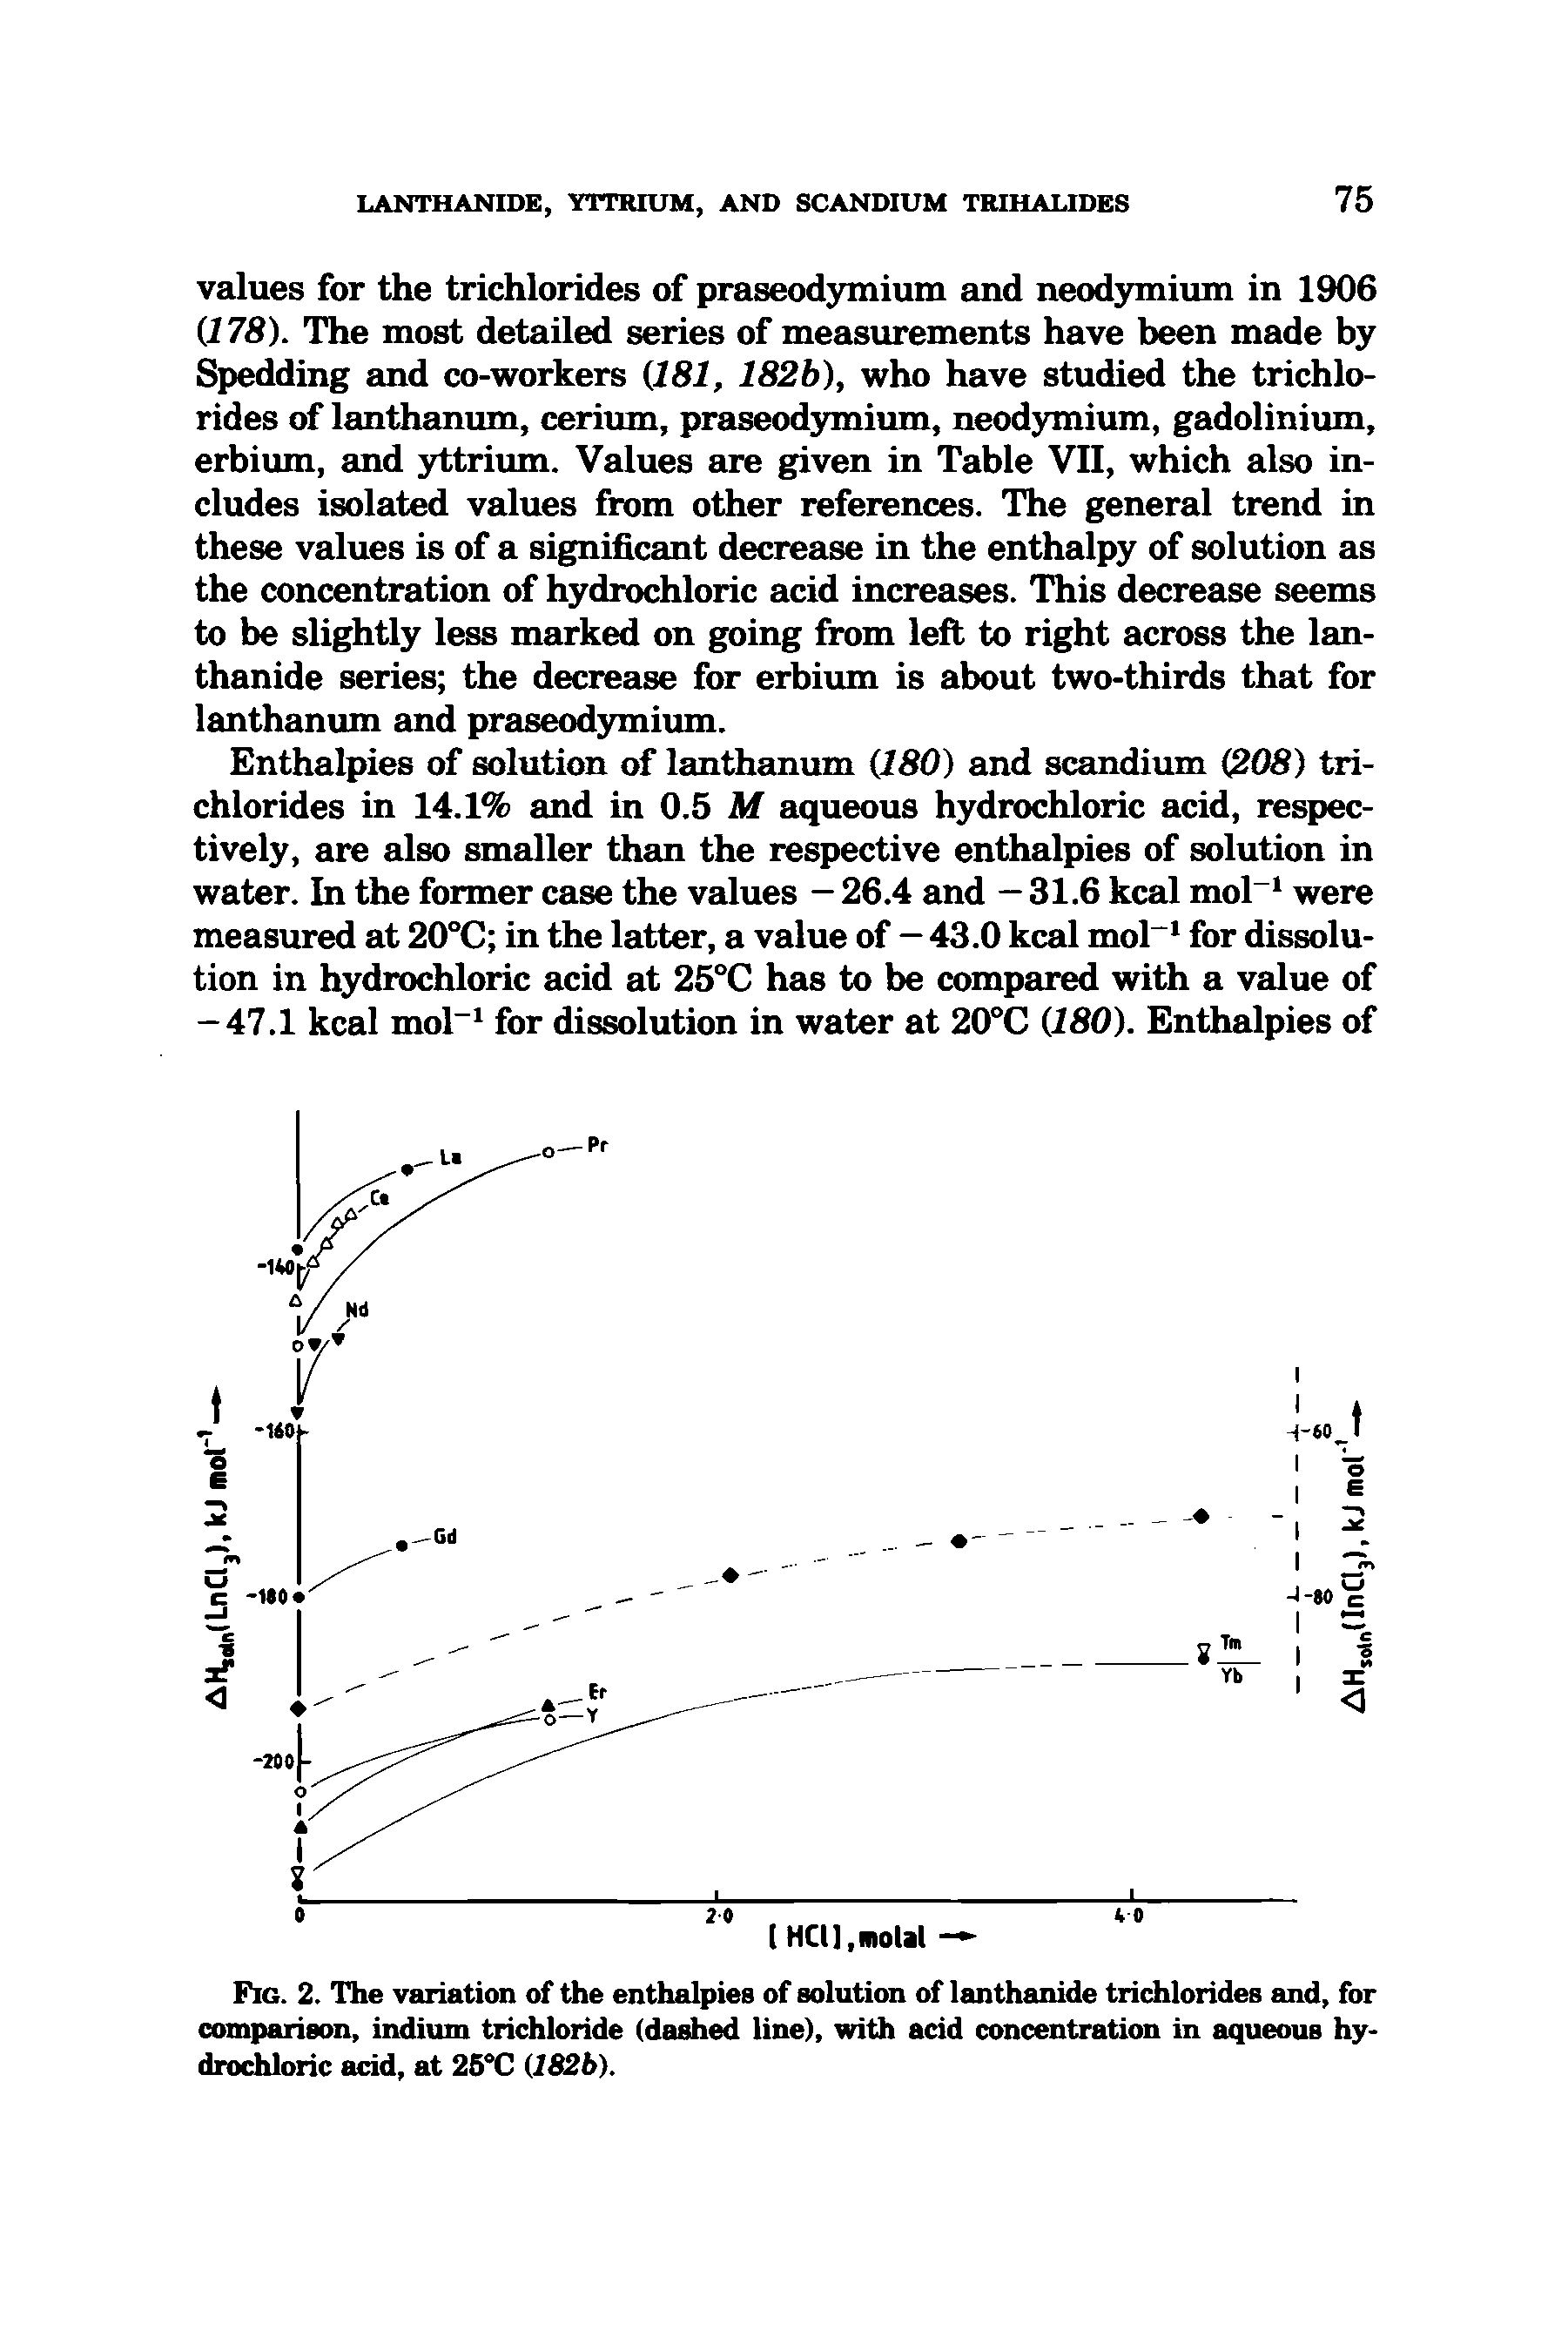 Fig. 2. The variation of the enthalpies of solution of lanthanide trichlorides and, for comparison, indium trichloride (dashed line), with acid concentration in aqueous hydrochloric acid, at 25°C (182b).